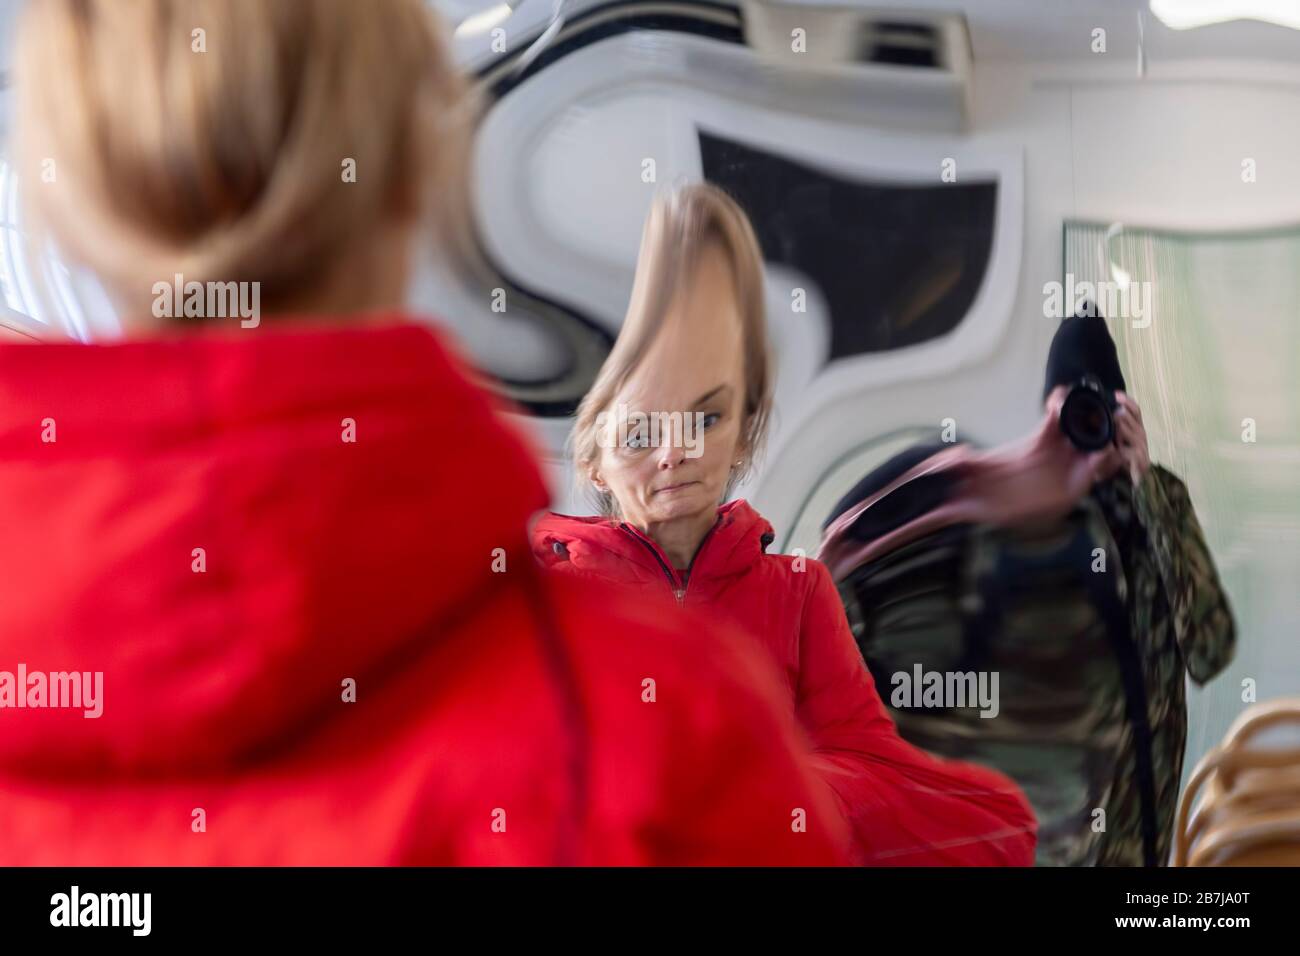 woman distorted in a mirror Stock Photo